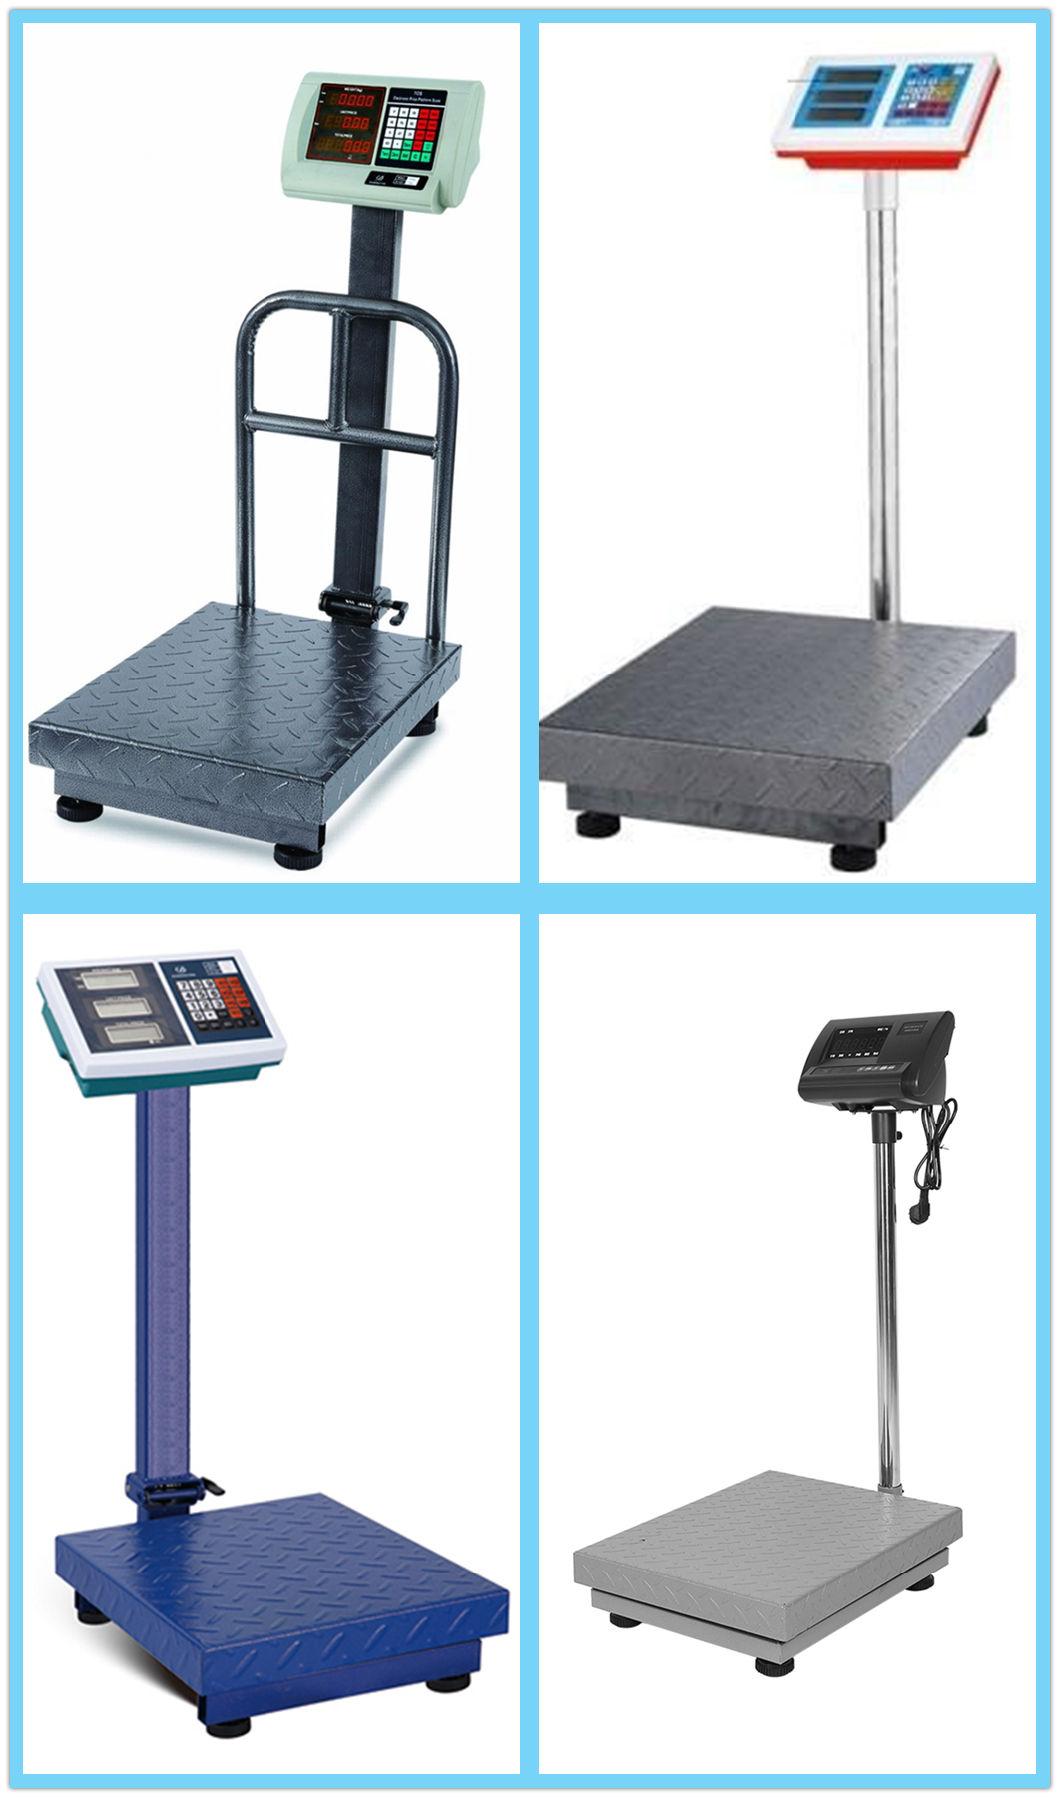 60kg Electronic Platform Scale with High Quality Big Display Screen Multi Function Platform Scale.